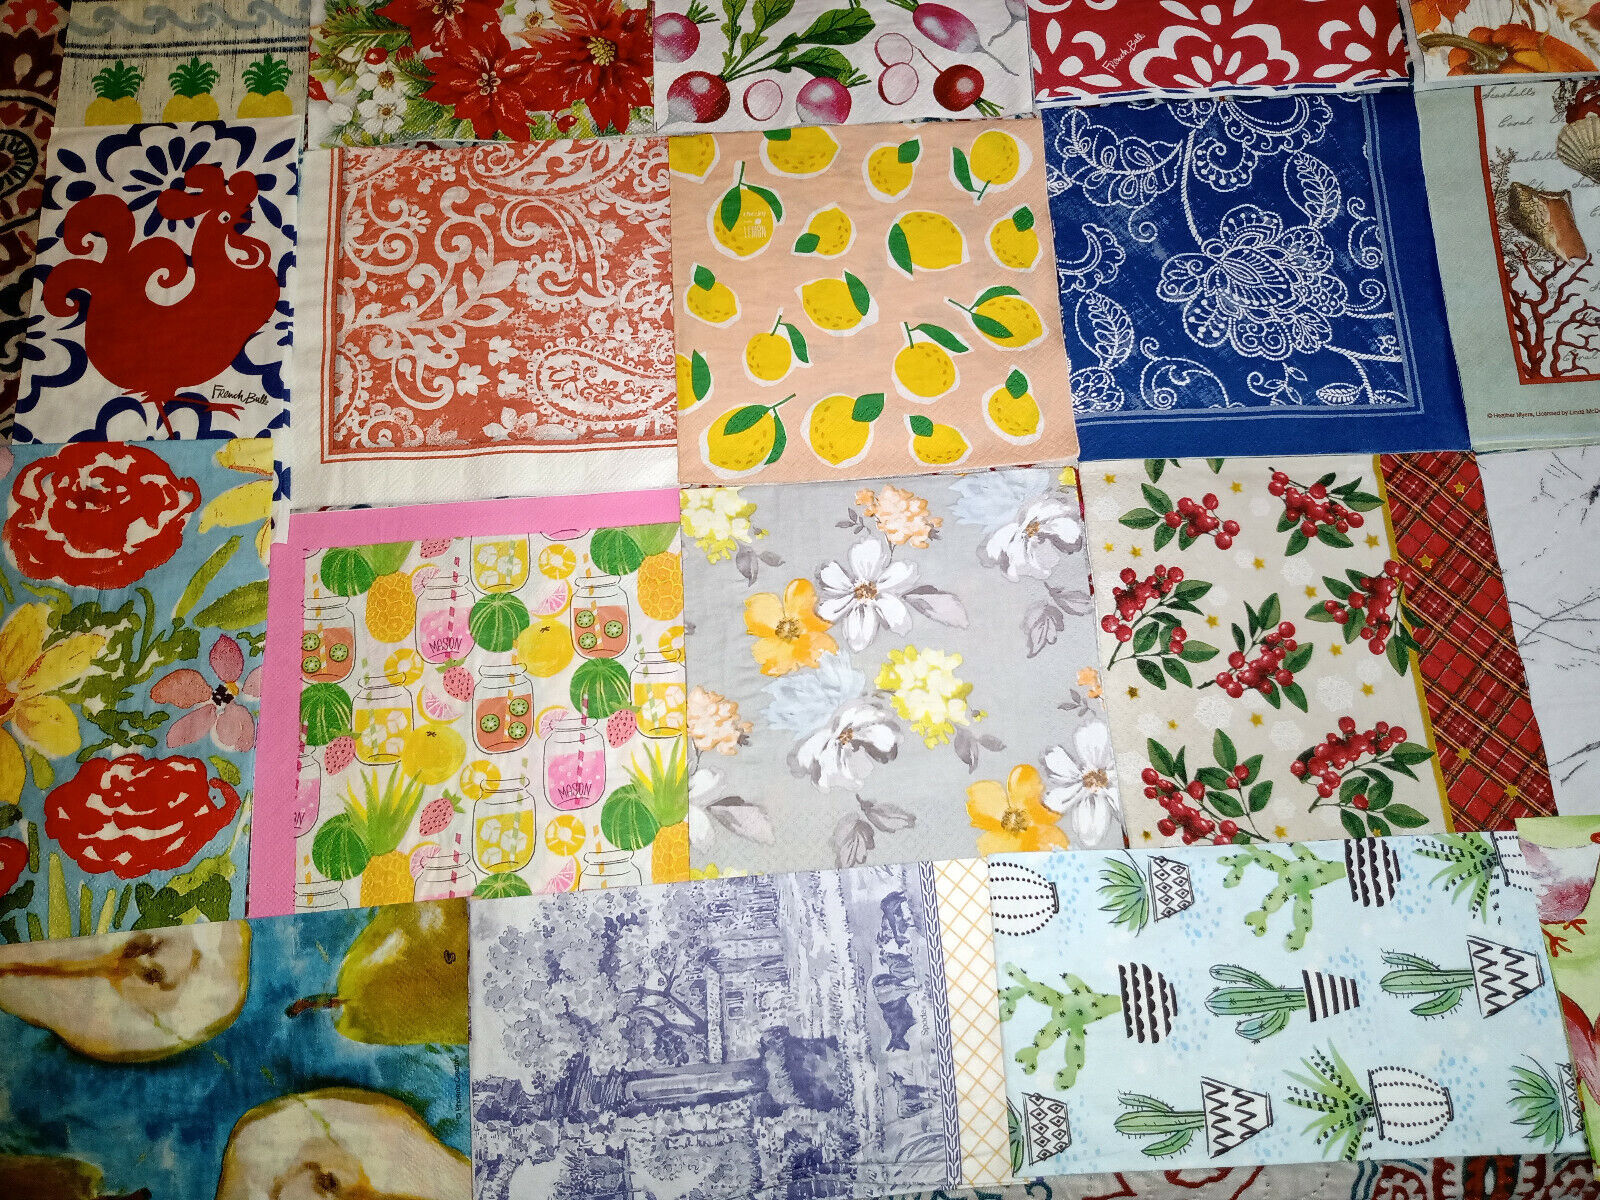 38 FLORAL & NATURE ALL OVER PATTERNS ~ LOT SET MIXED Paper Napkins ~ Decoupage Без бренда - фотография #4